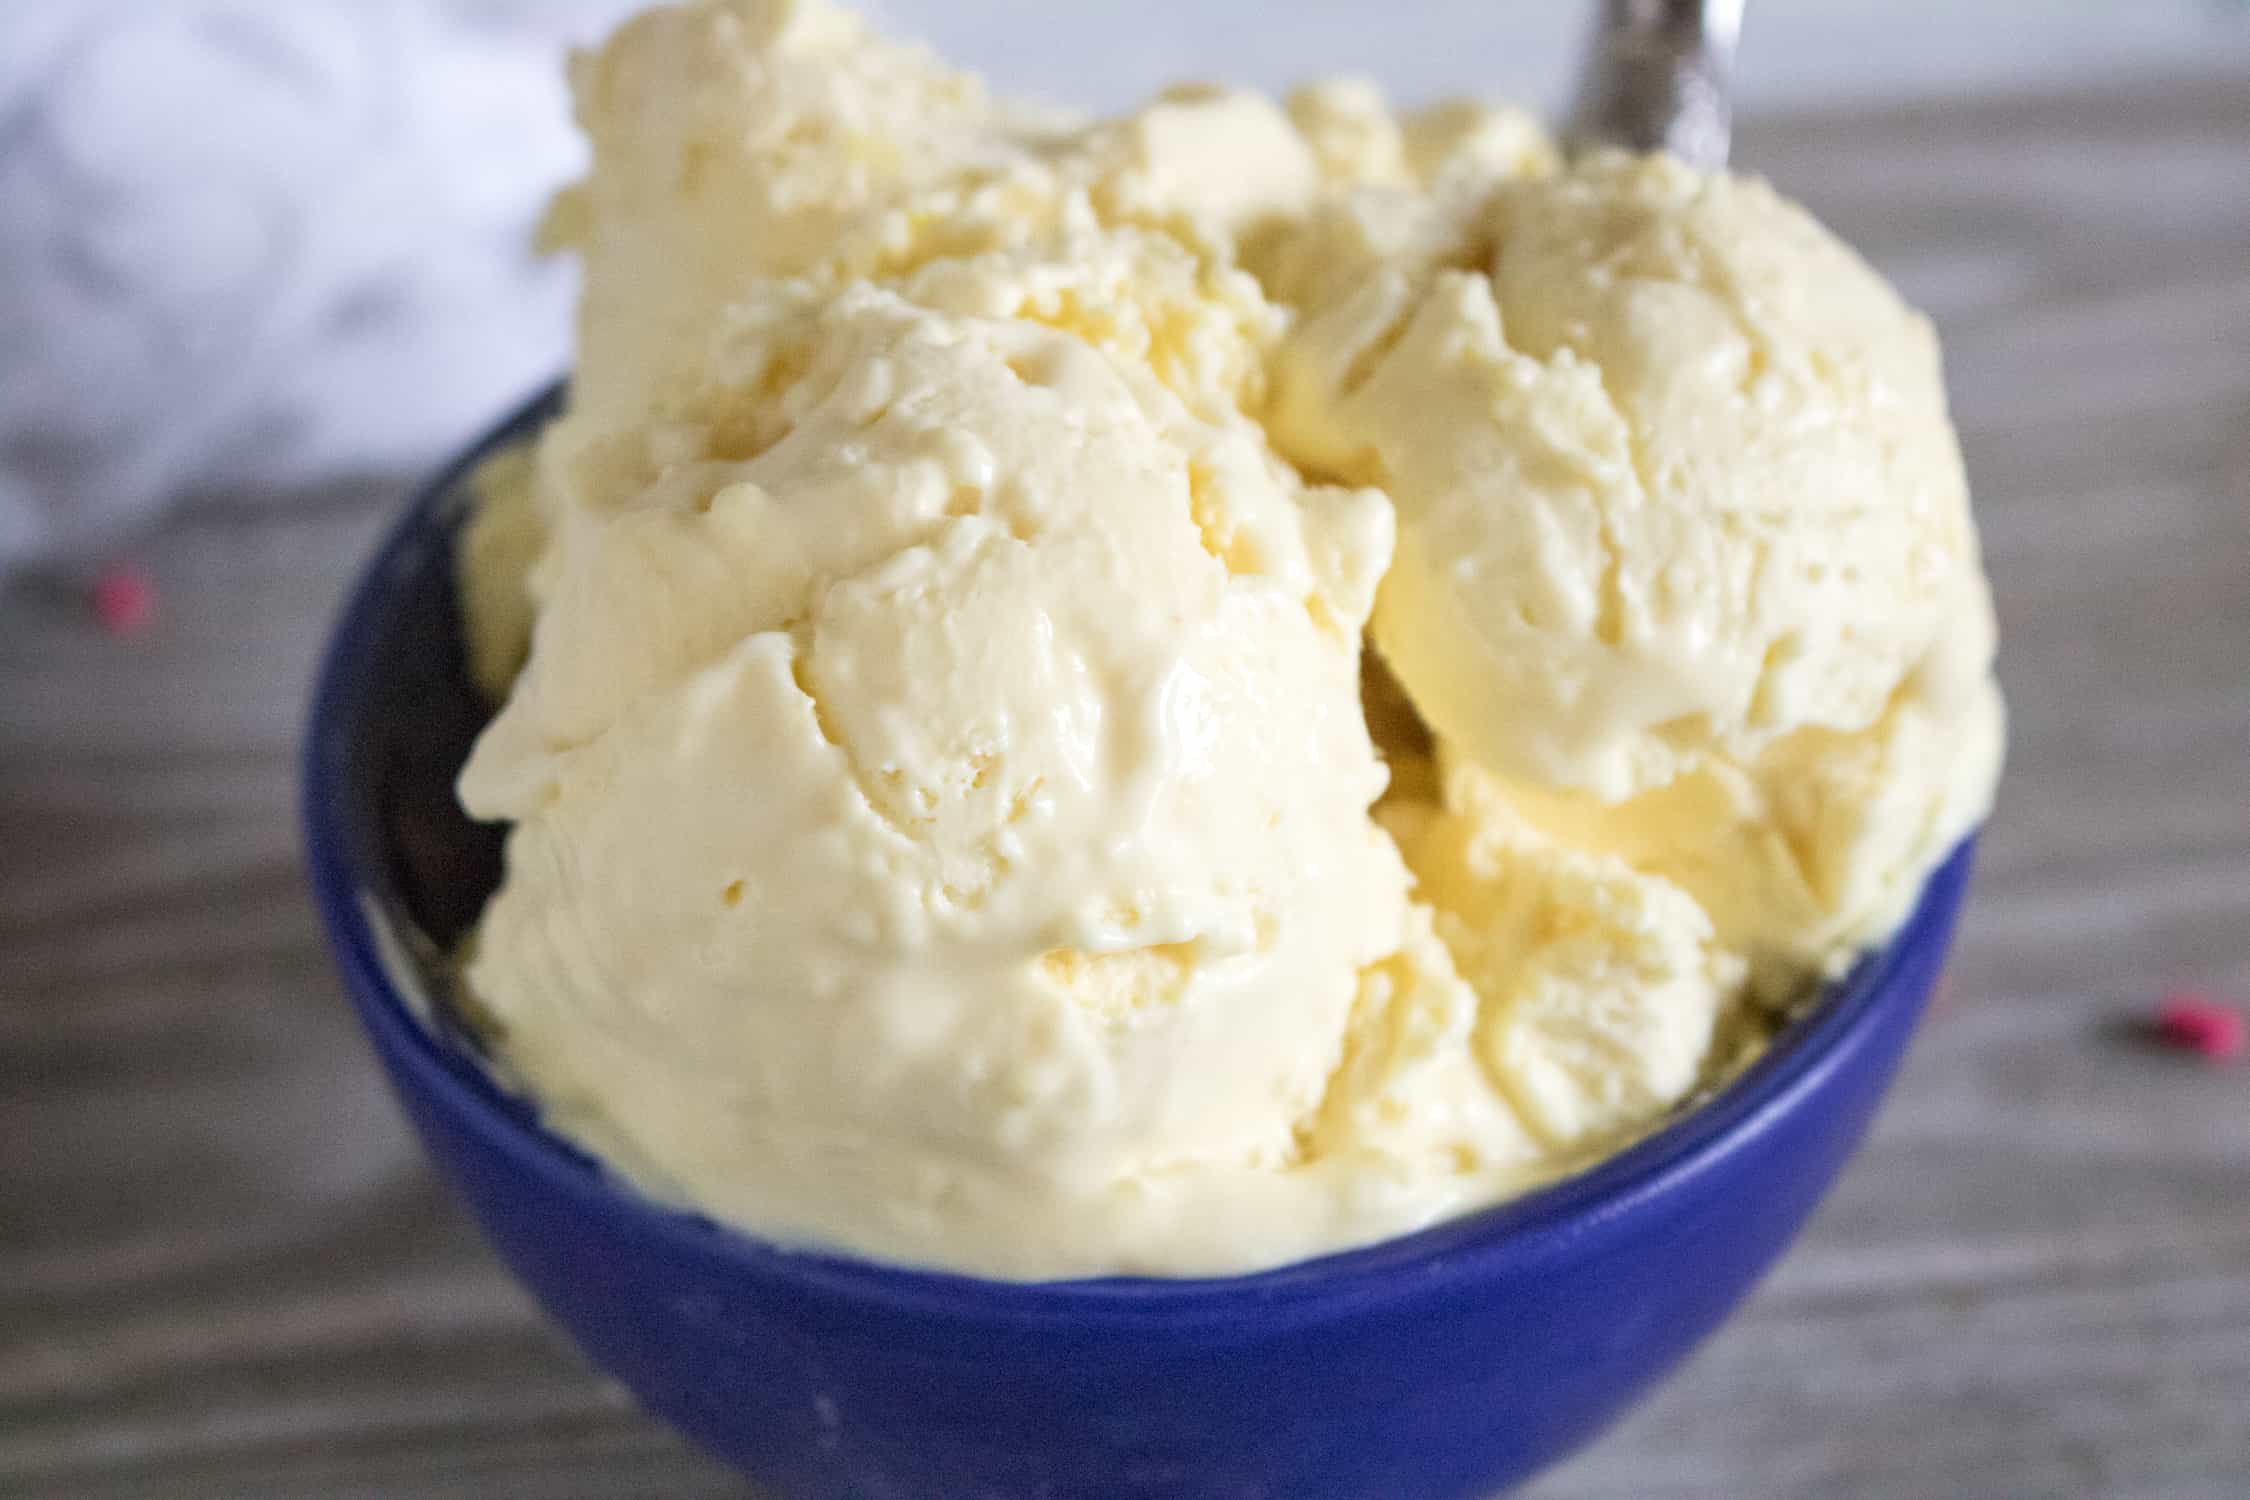 close-up view of a scoop of Lemonade No-Churn Ice Cream served in a blue dessert bowl